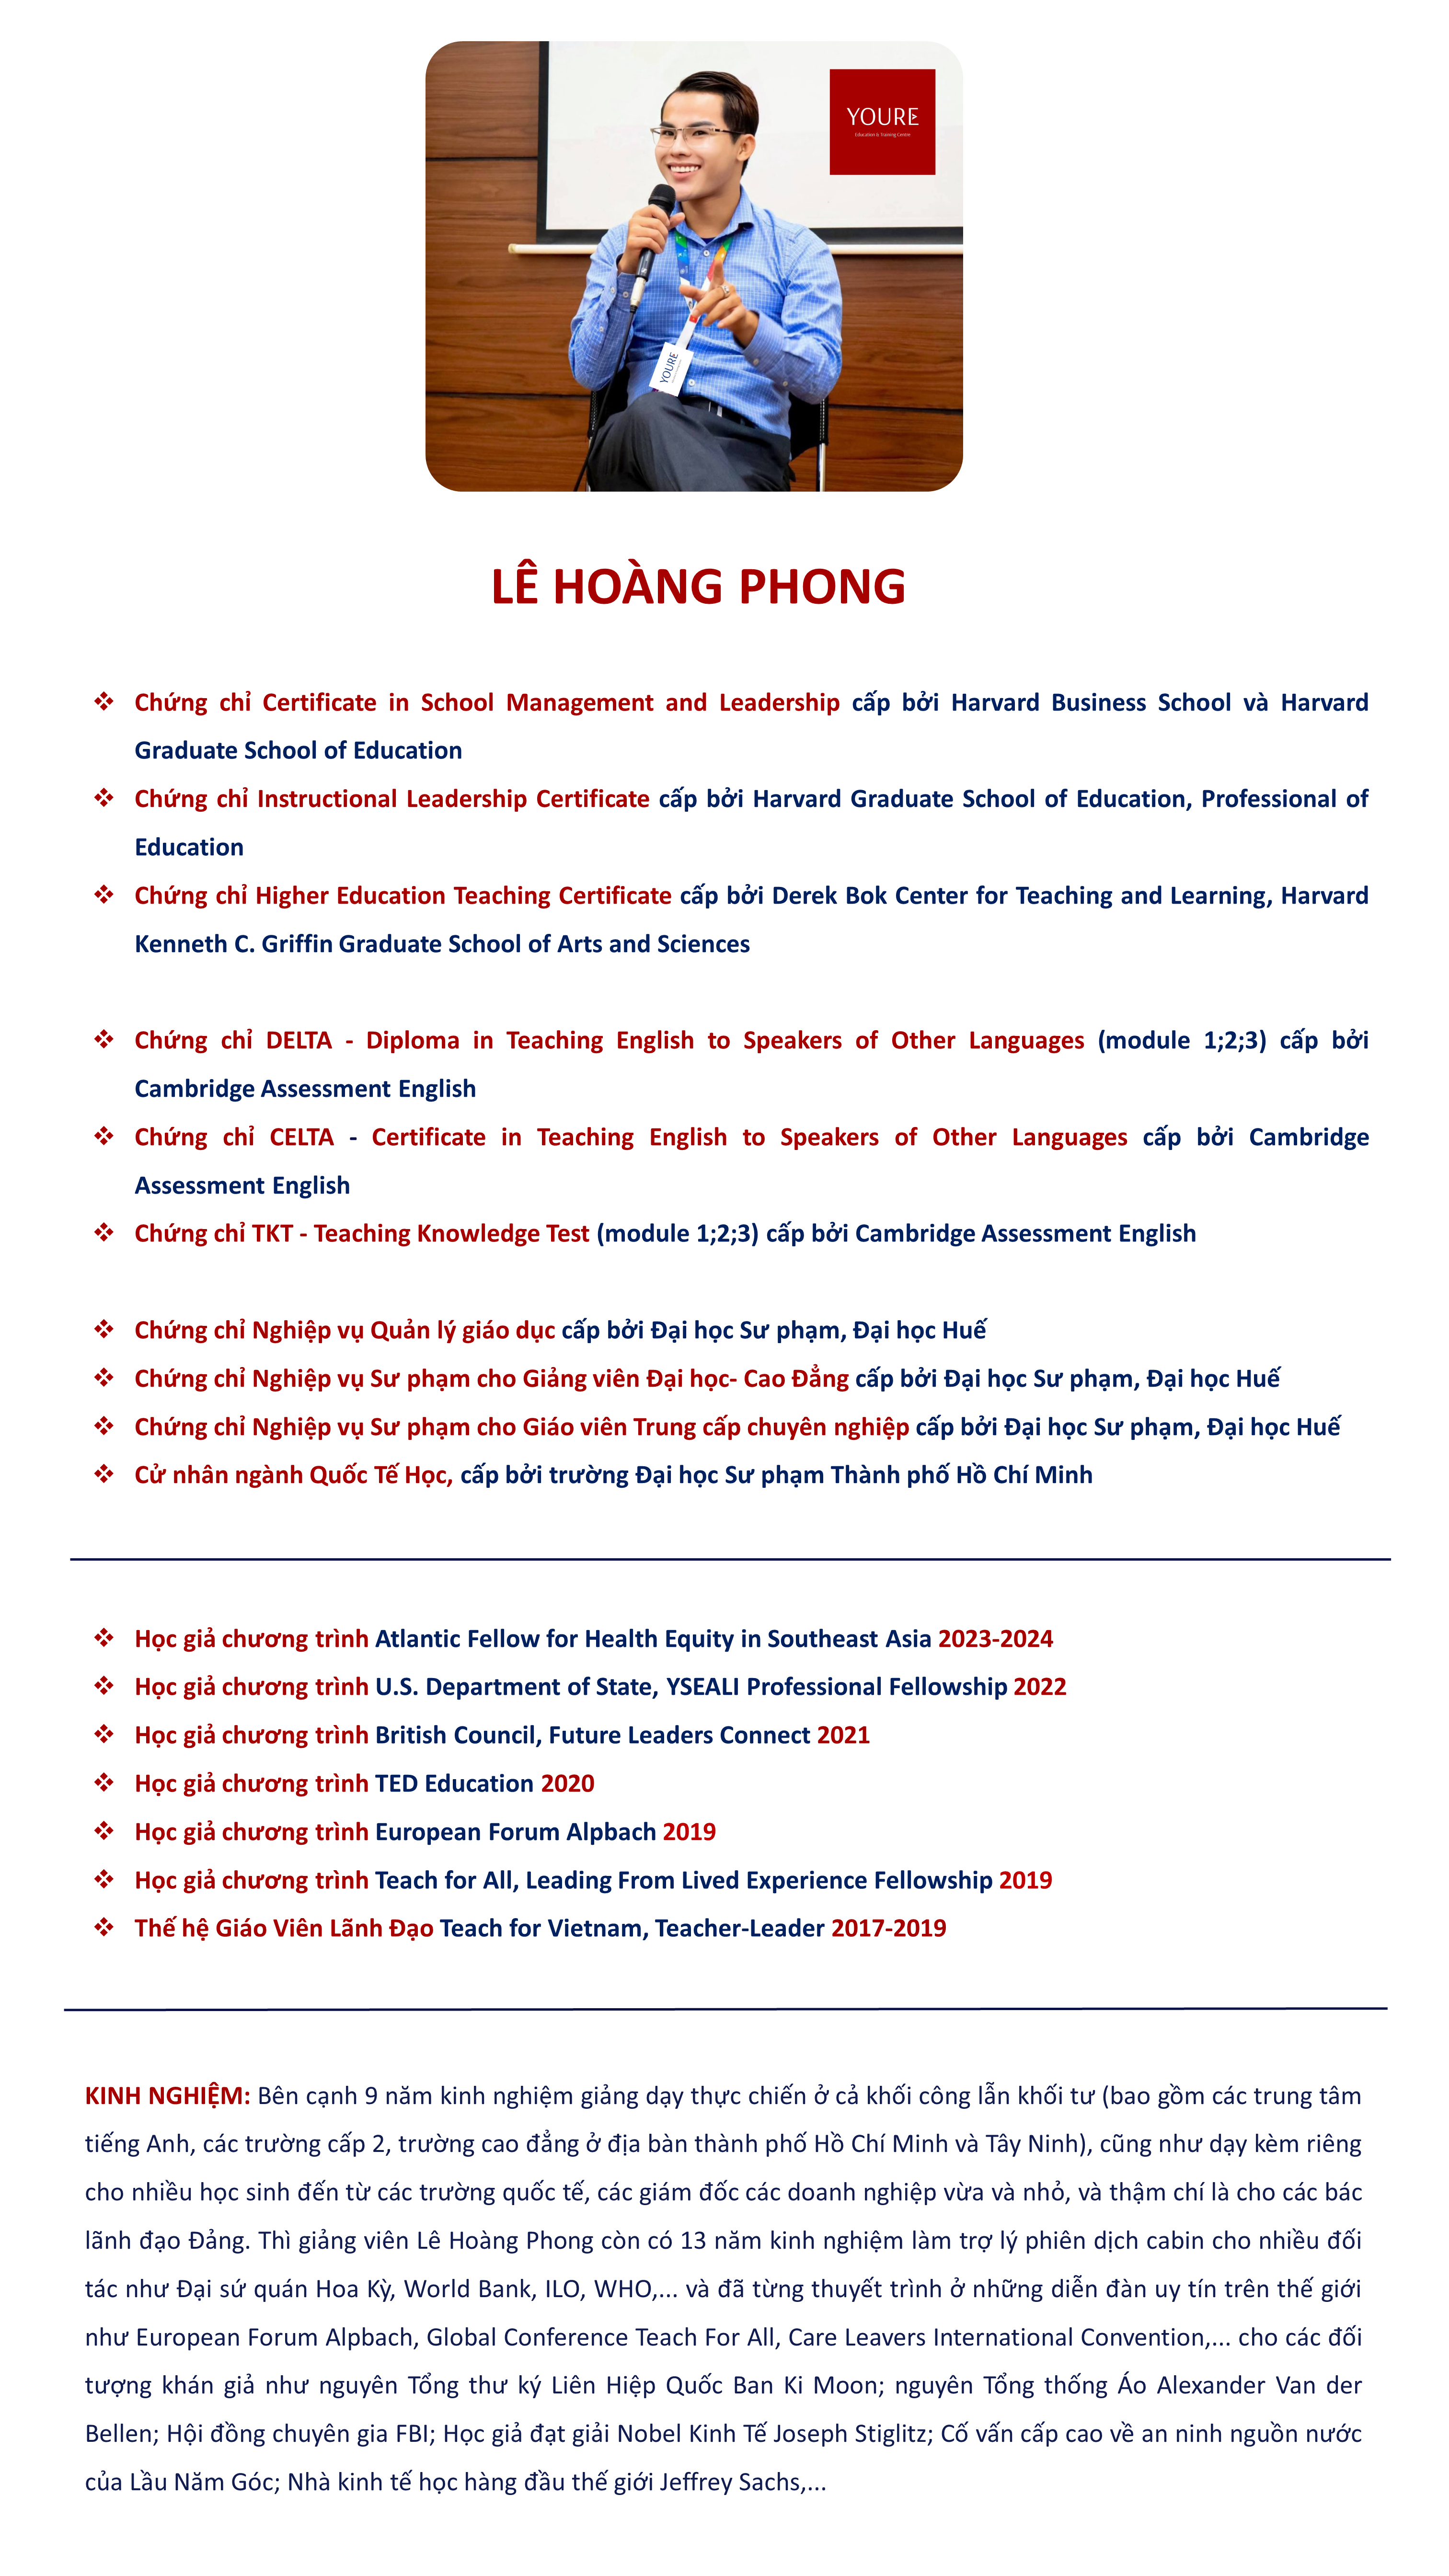 Profile-Giang-Vien-update May 2023